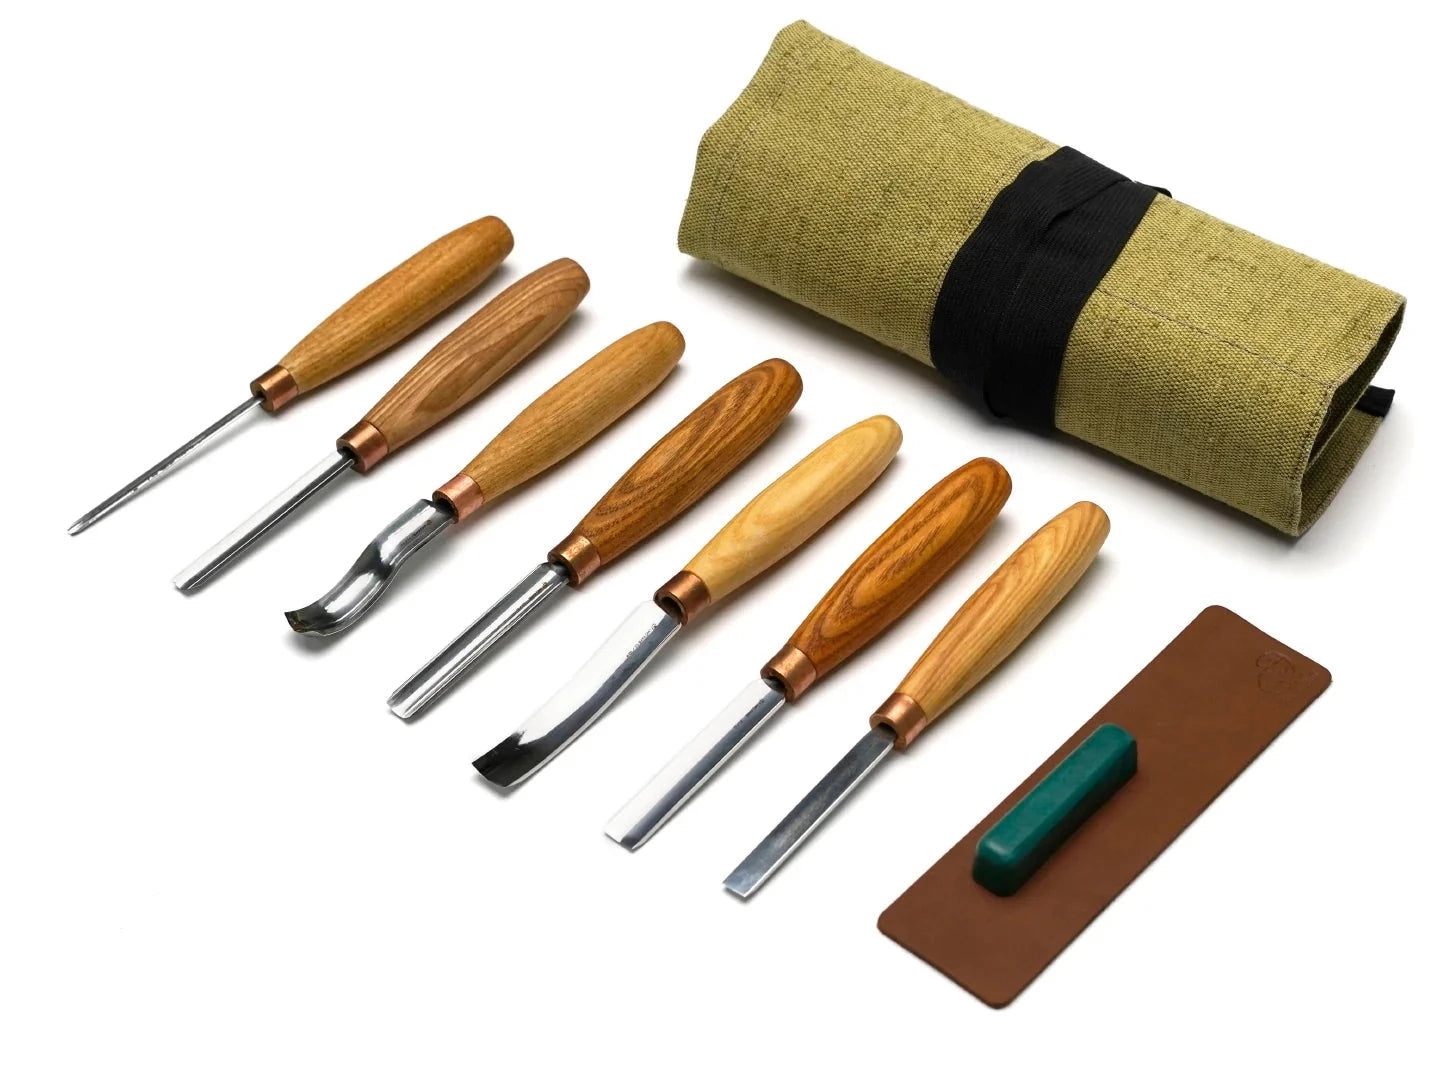 Wood Carving Set of 7 Chisels